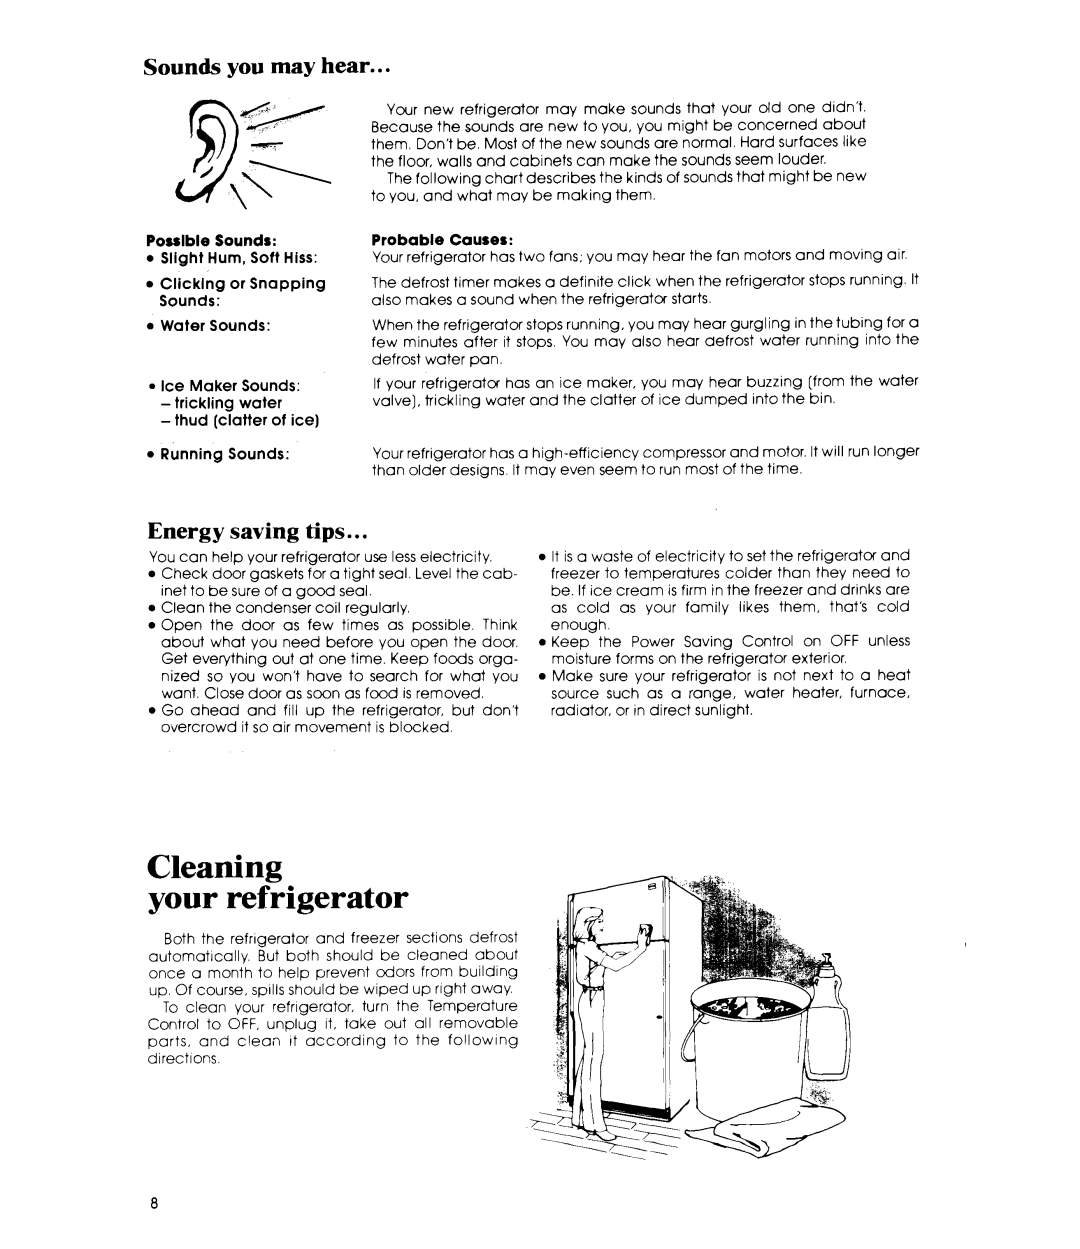 Whirlpool ET22ZK manual aning your refrigerator, Sounds you may hear, Energy saving tips, 4&&/ 3P’ 